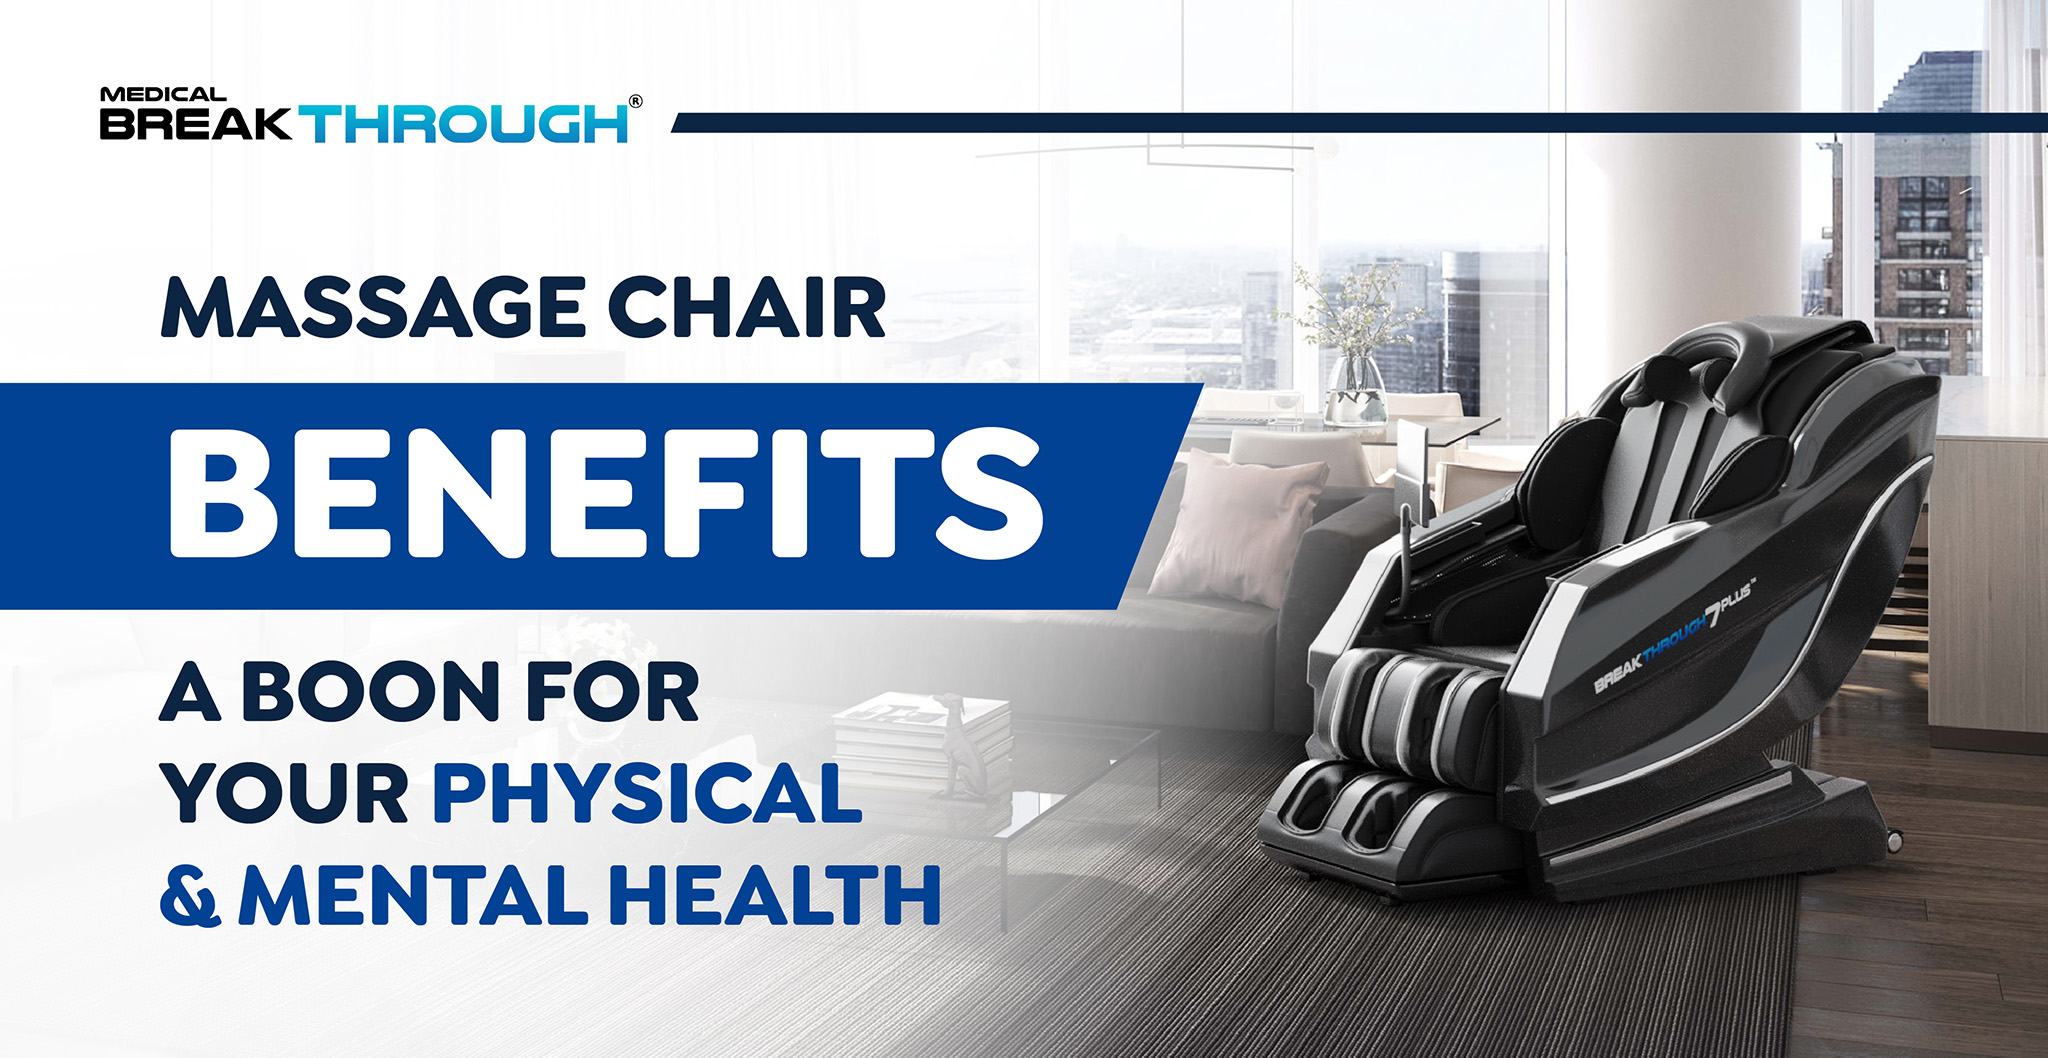 https://www.medicalbreakthrough.org/images/blog/Massage-Chair-Benefits-A-Boon-for-Your-Physical-&-Mental-Health.jpg